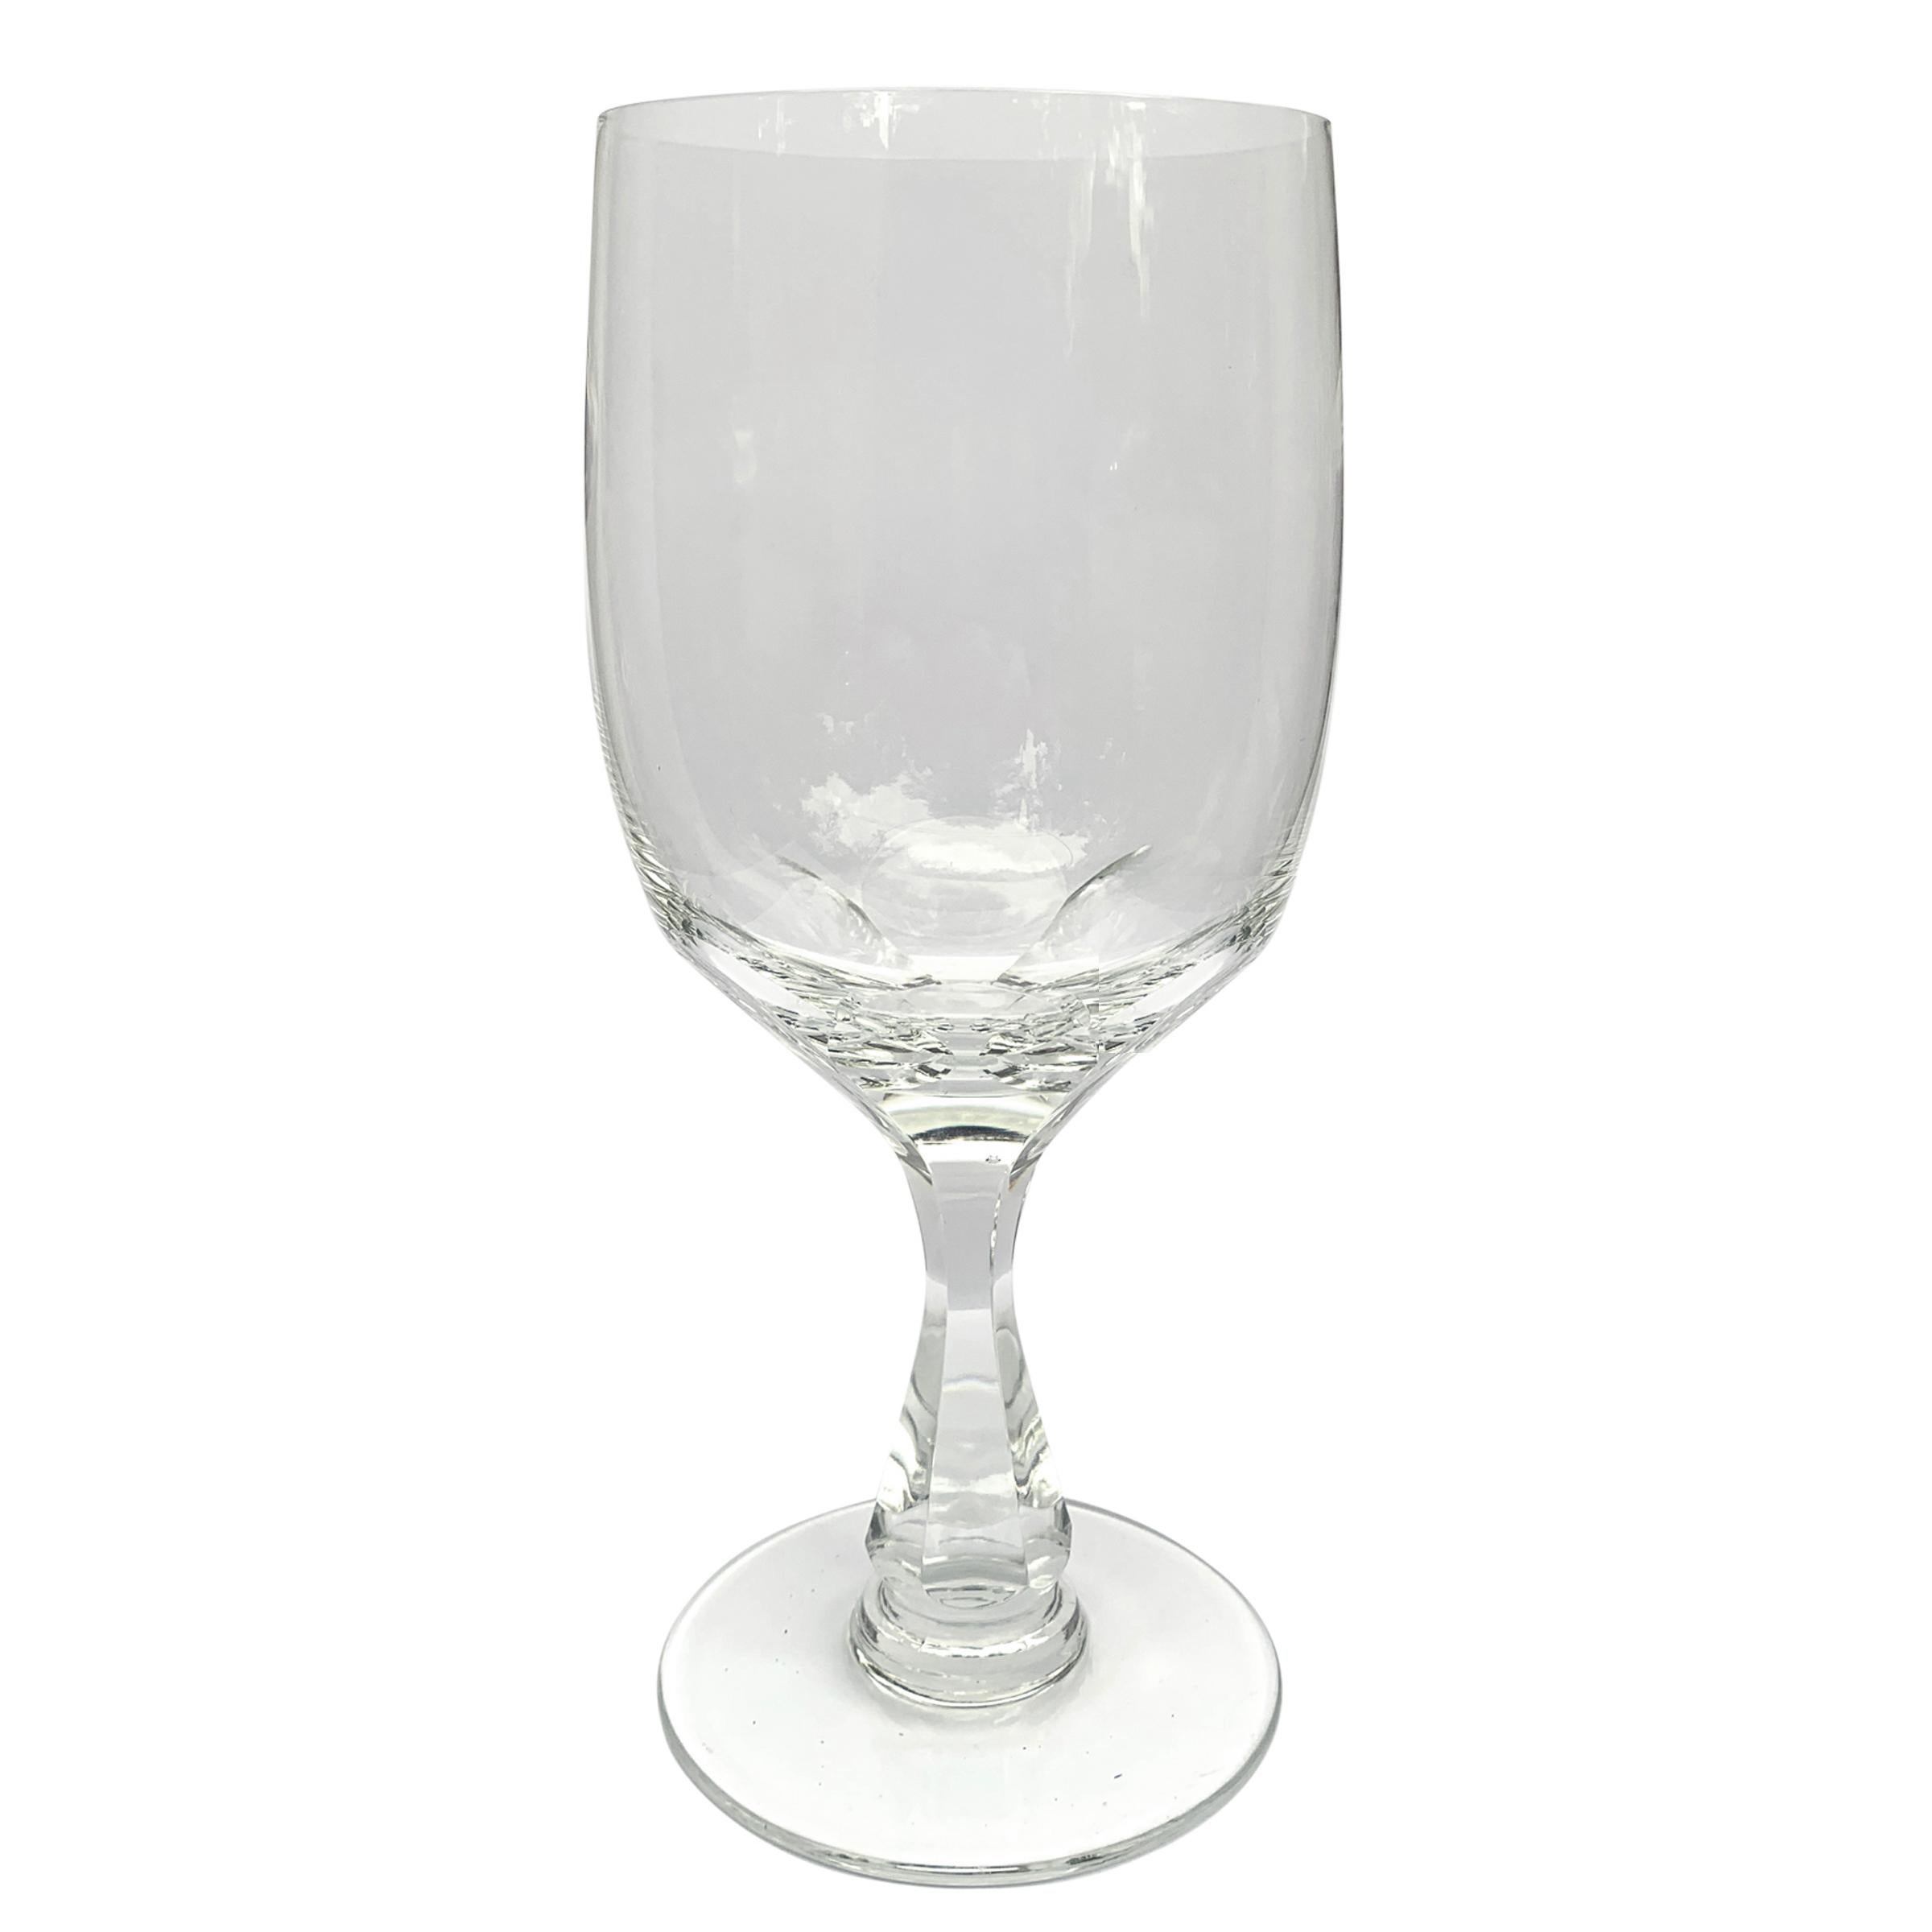 A fantastic set of ten English cut crystal wine glasses with superb long panel-cuts running from the bottom of the bowl all the way down the stem to the foot. Cuts like these are reserved for only the most skilled and accomplished glass cutters.